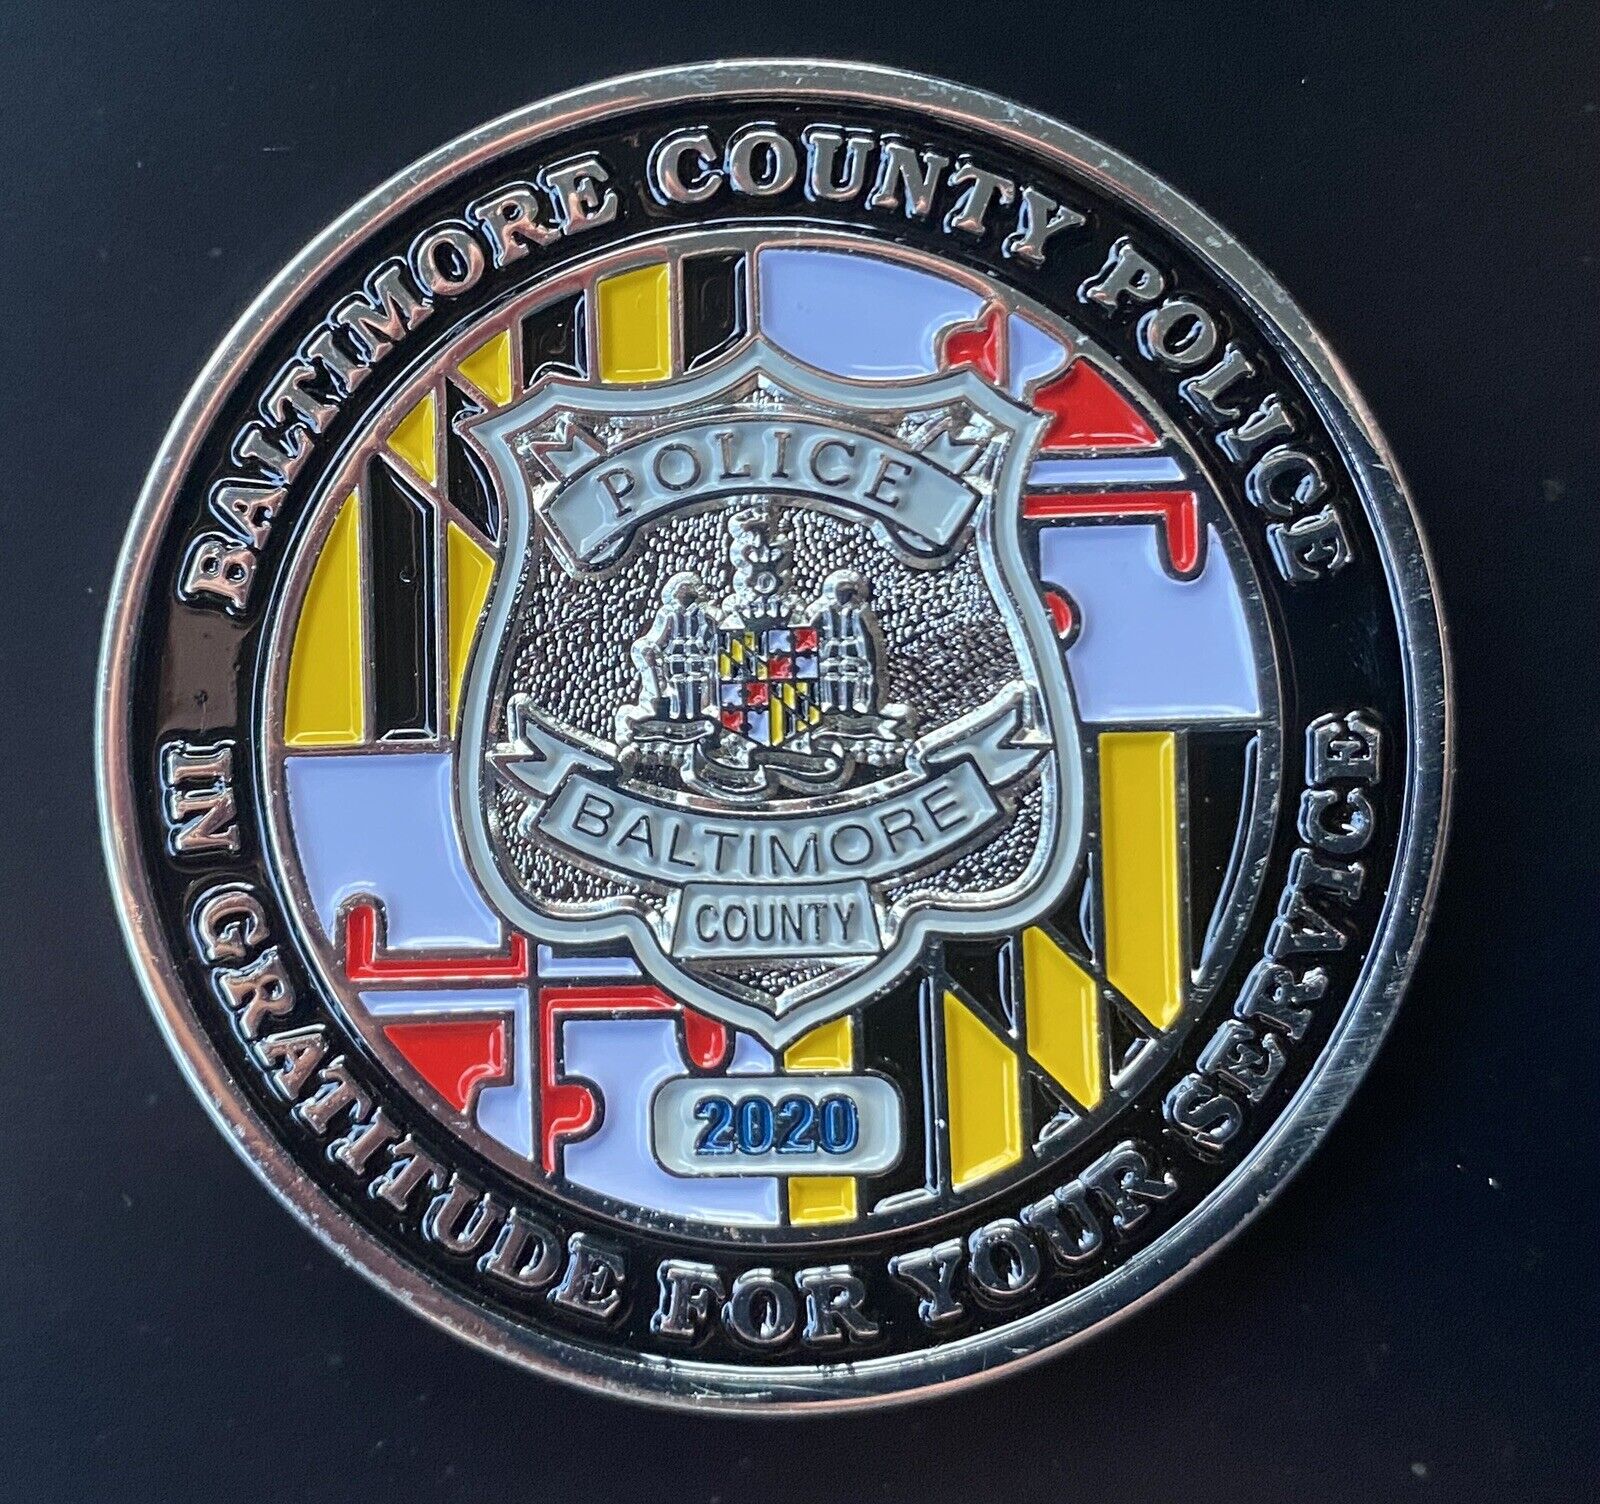 Baltimore County Maryland Police COVID Challenge Coin 2020